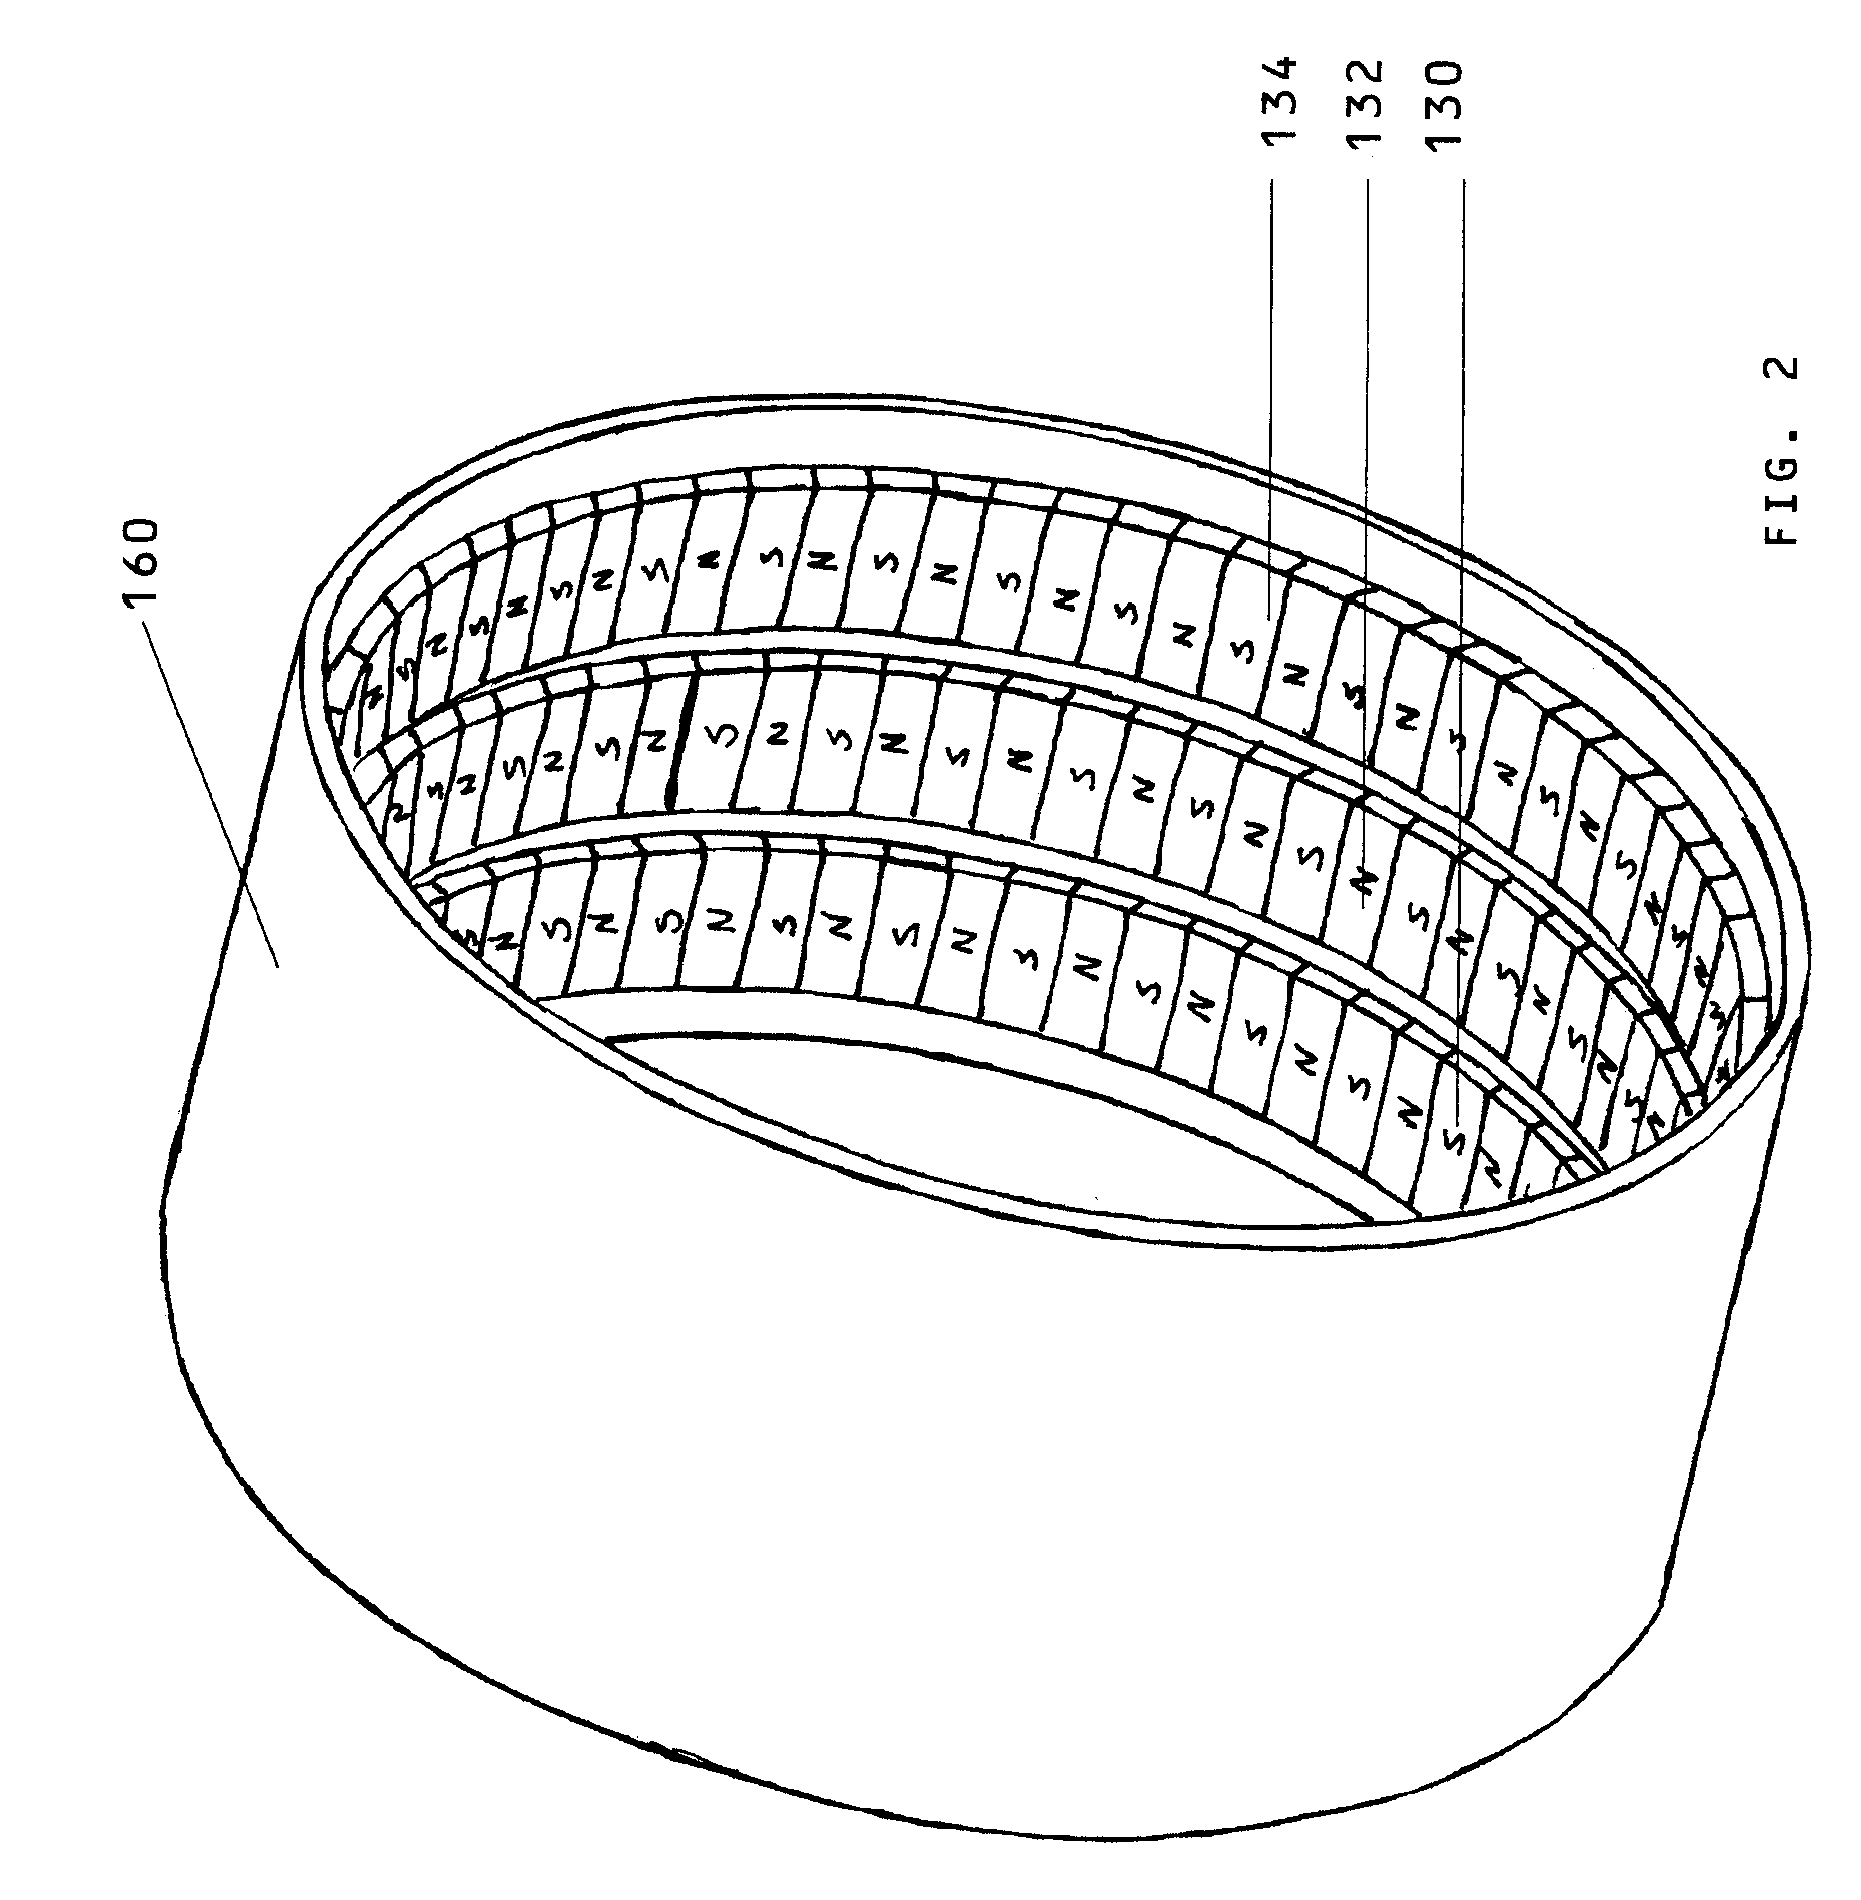 Method of fabricating a magnetic flux channel for a transverse wound motor